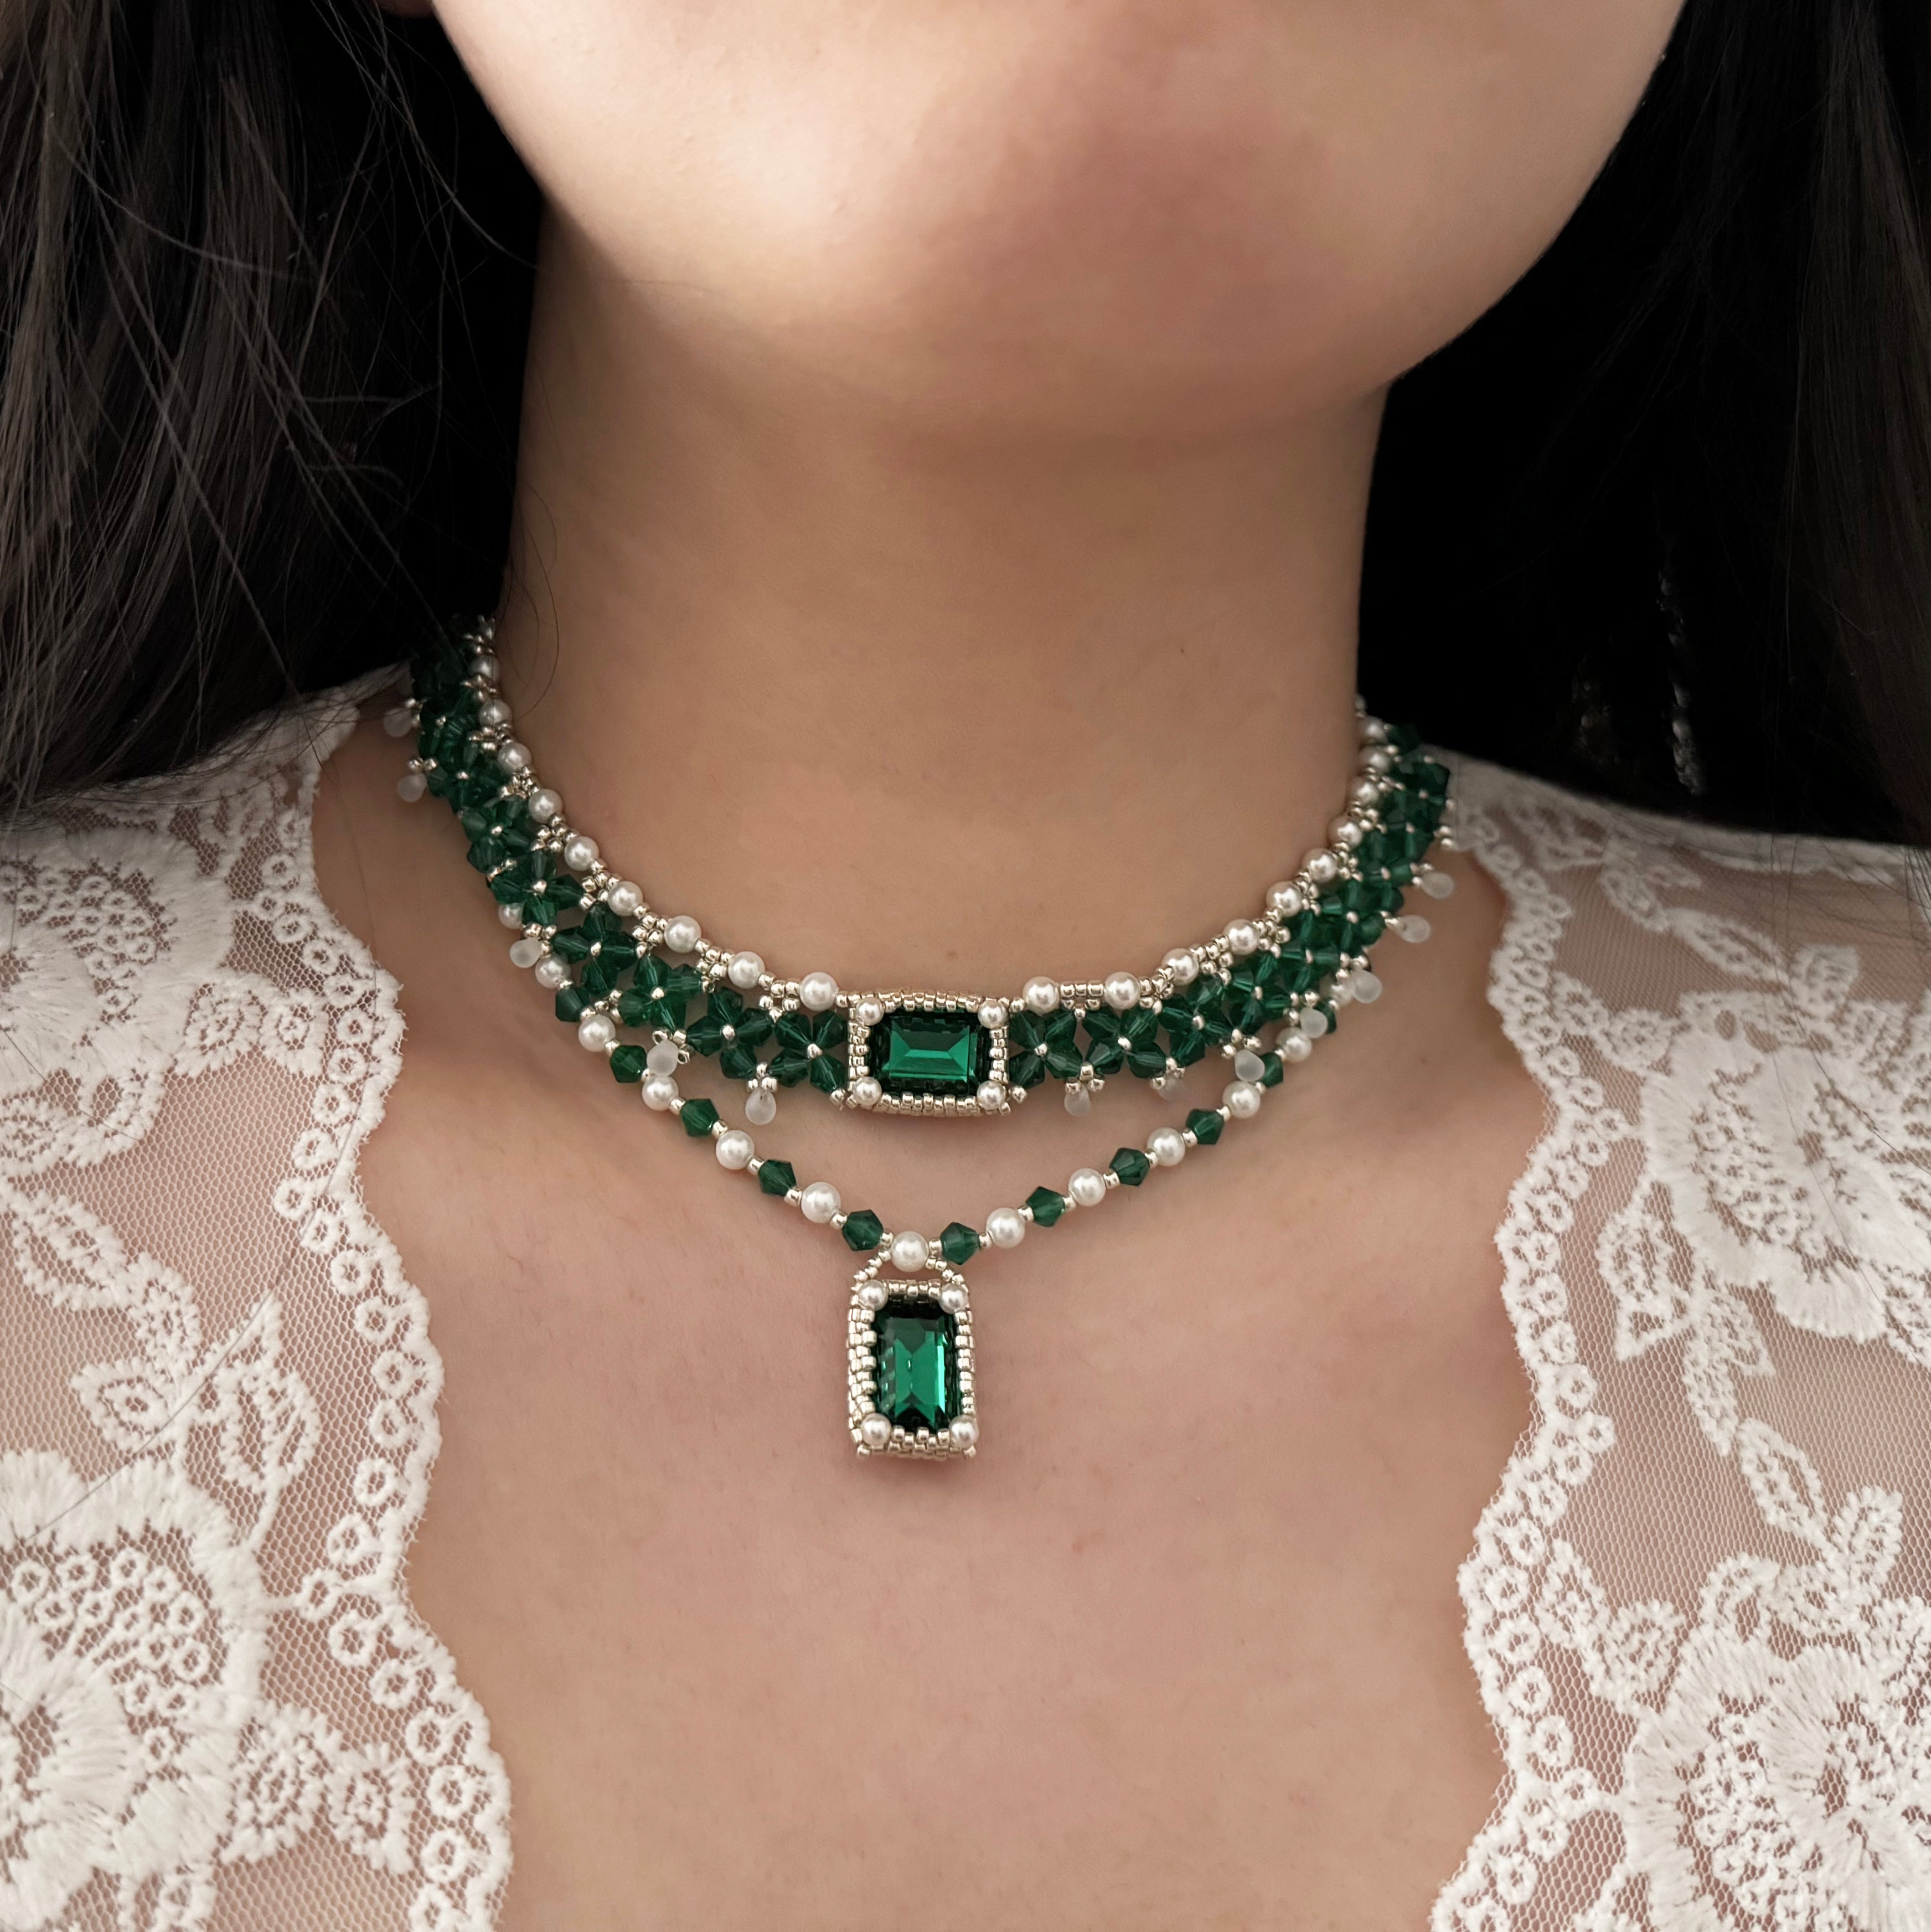 Kit - Green Square Stone Pearl Necklace